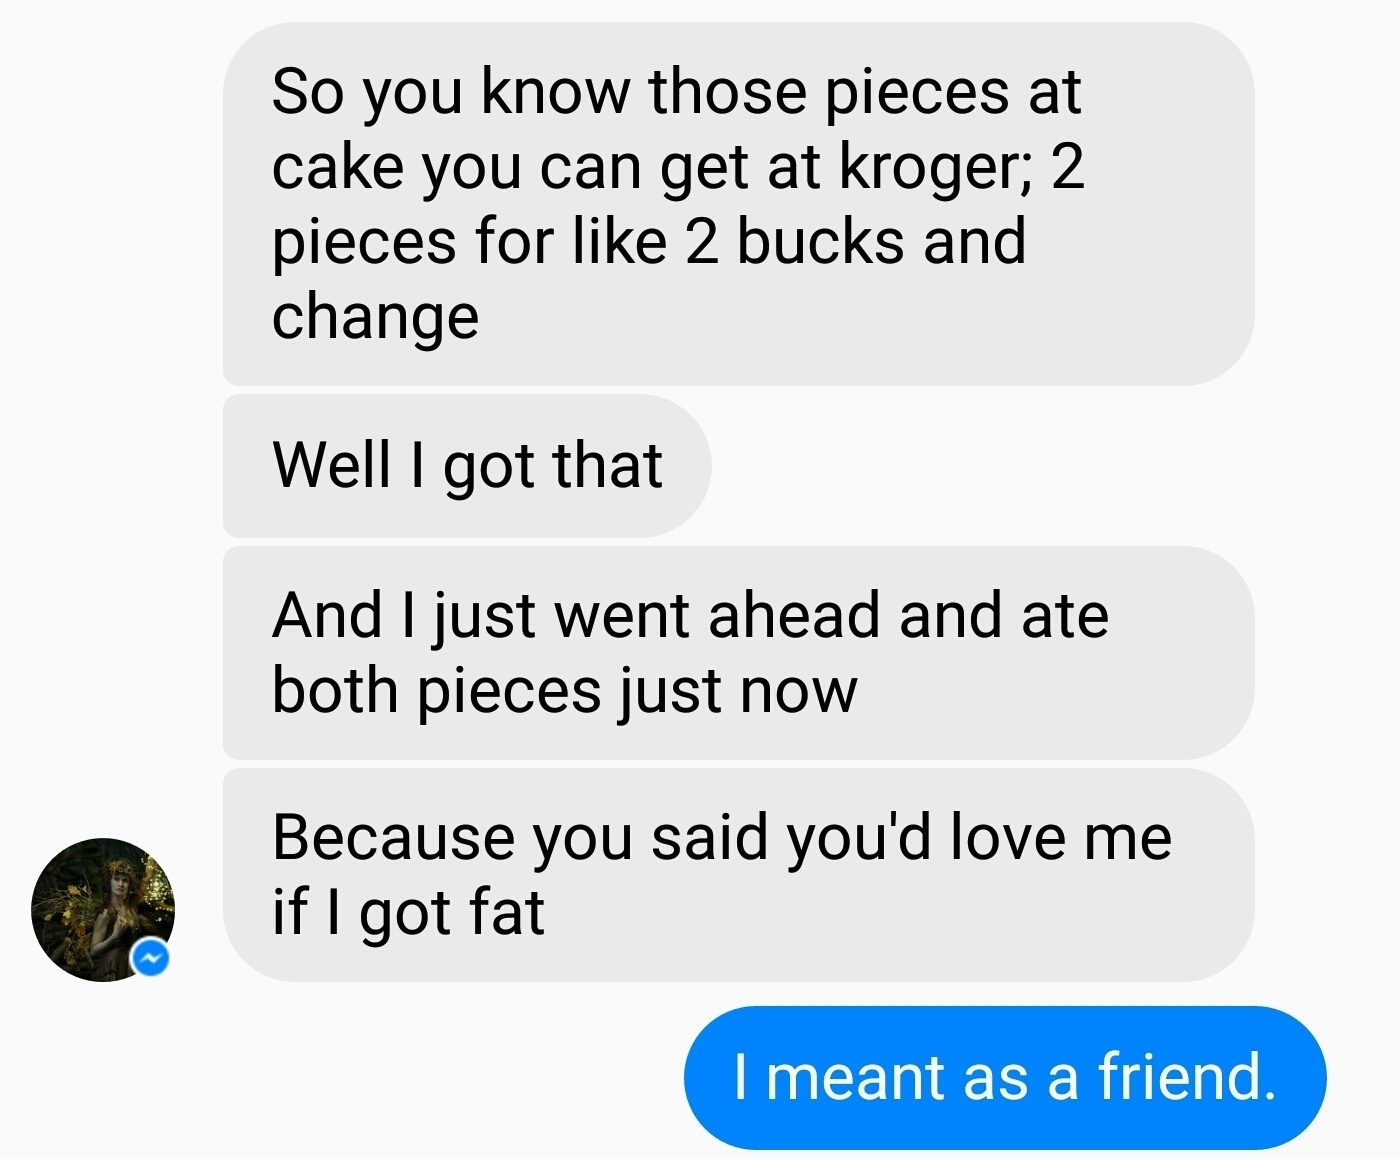 funny pieces of text - So you know those pieces at cake you can get at kroger; 2 pieces for 2 bucks and change Well I got that And I just went ahead and ate both pieces just now Because you said you'd love me if I got fat I meant as a friend.